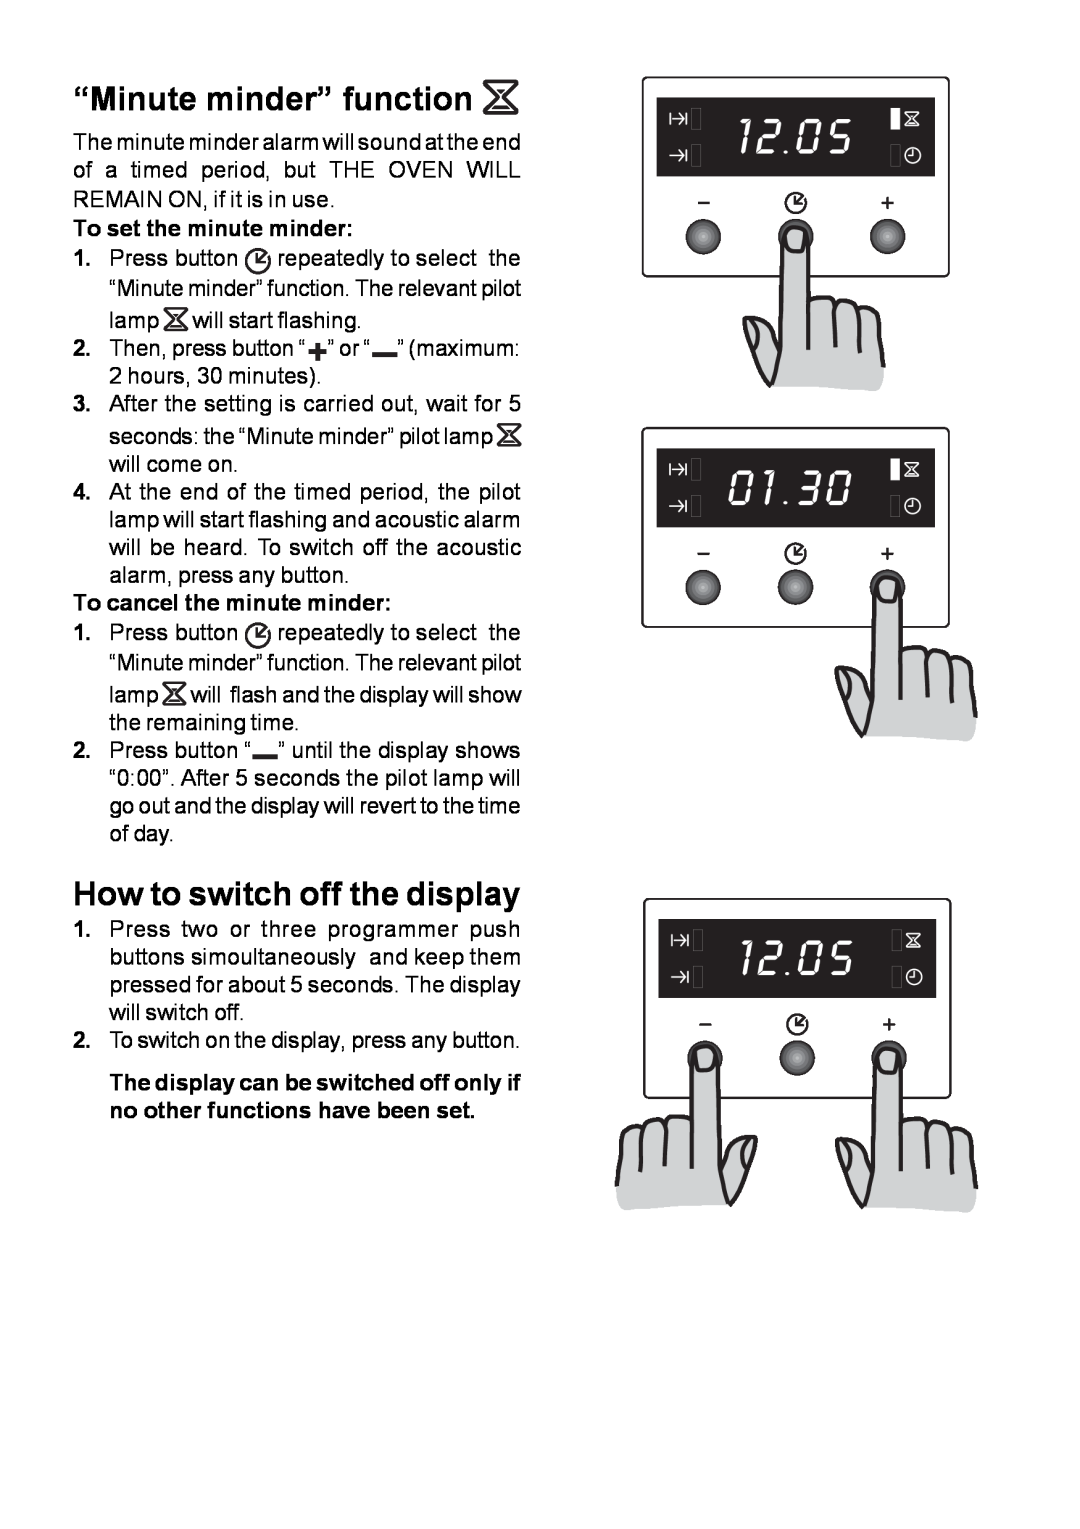 Moffat MSF 615 manual “Minute minder” function, How to switch off the display, To set the minute minder 